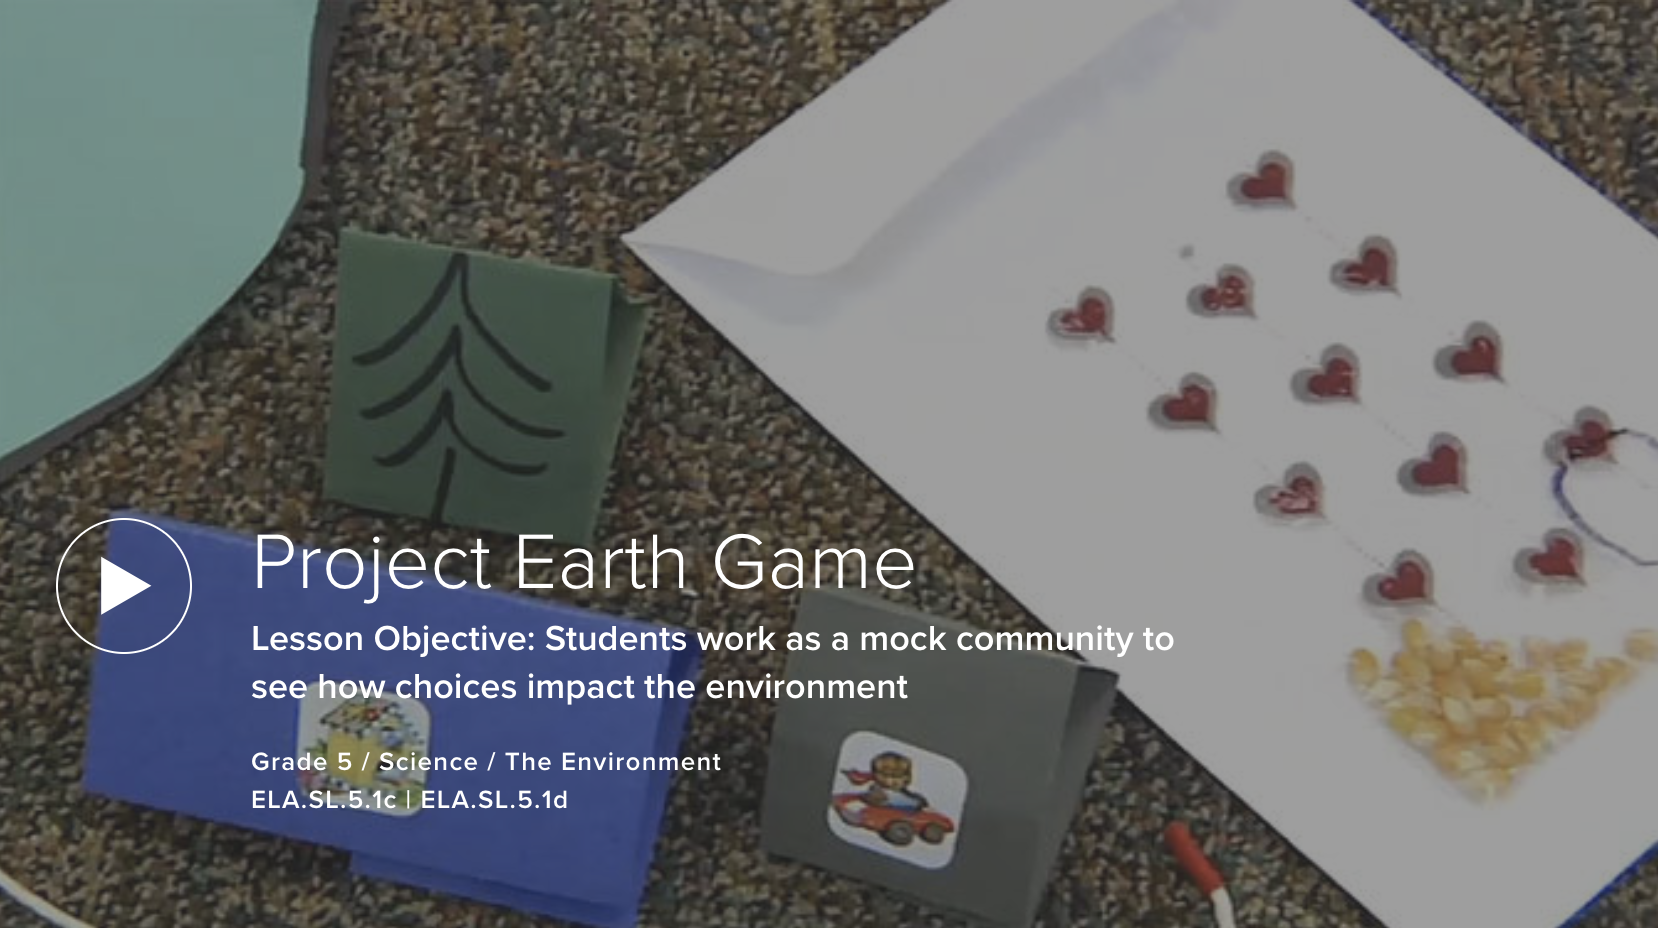 VIDEO: Project Earth Game